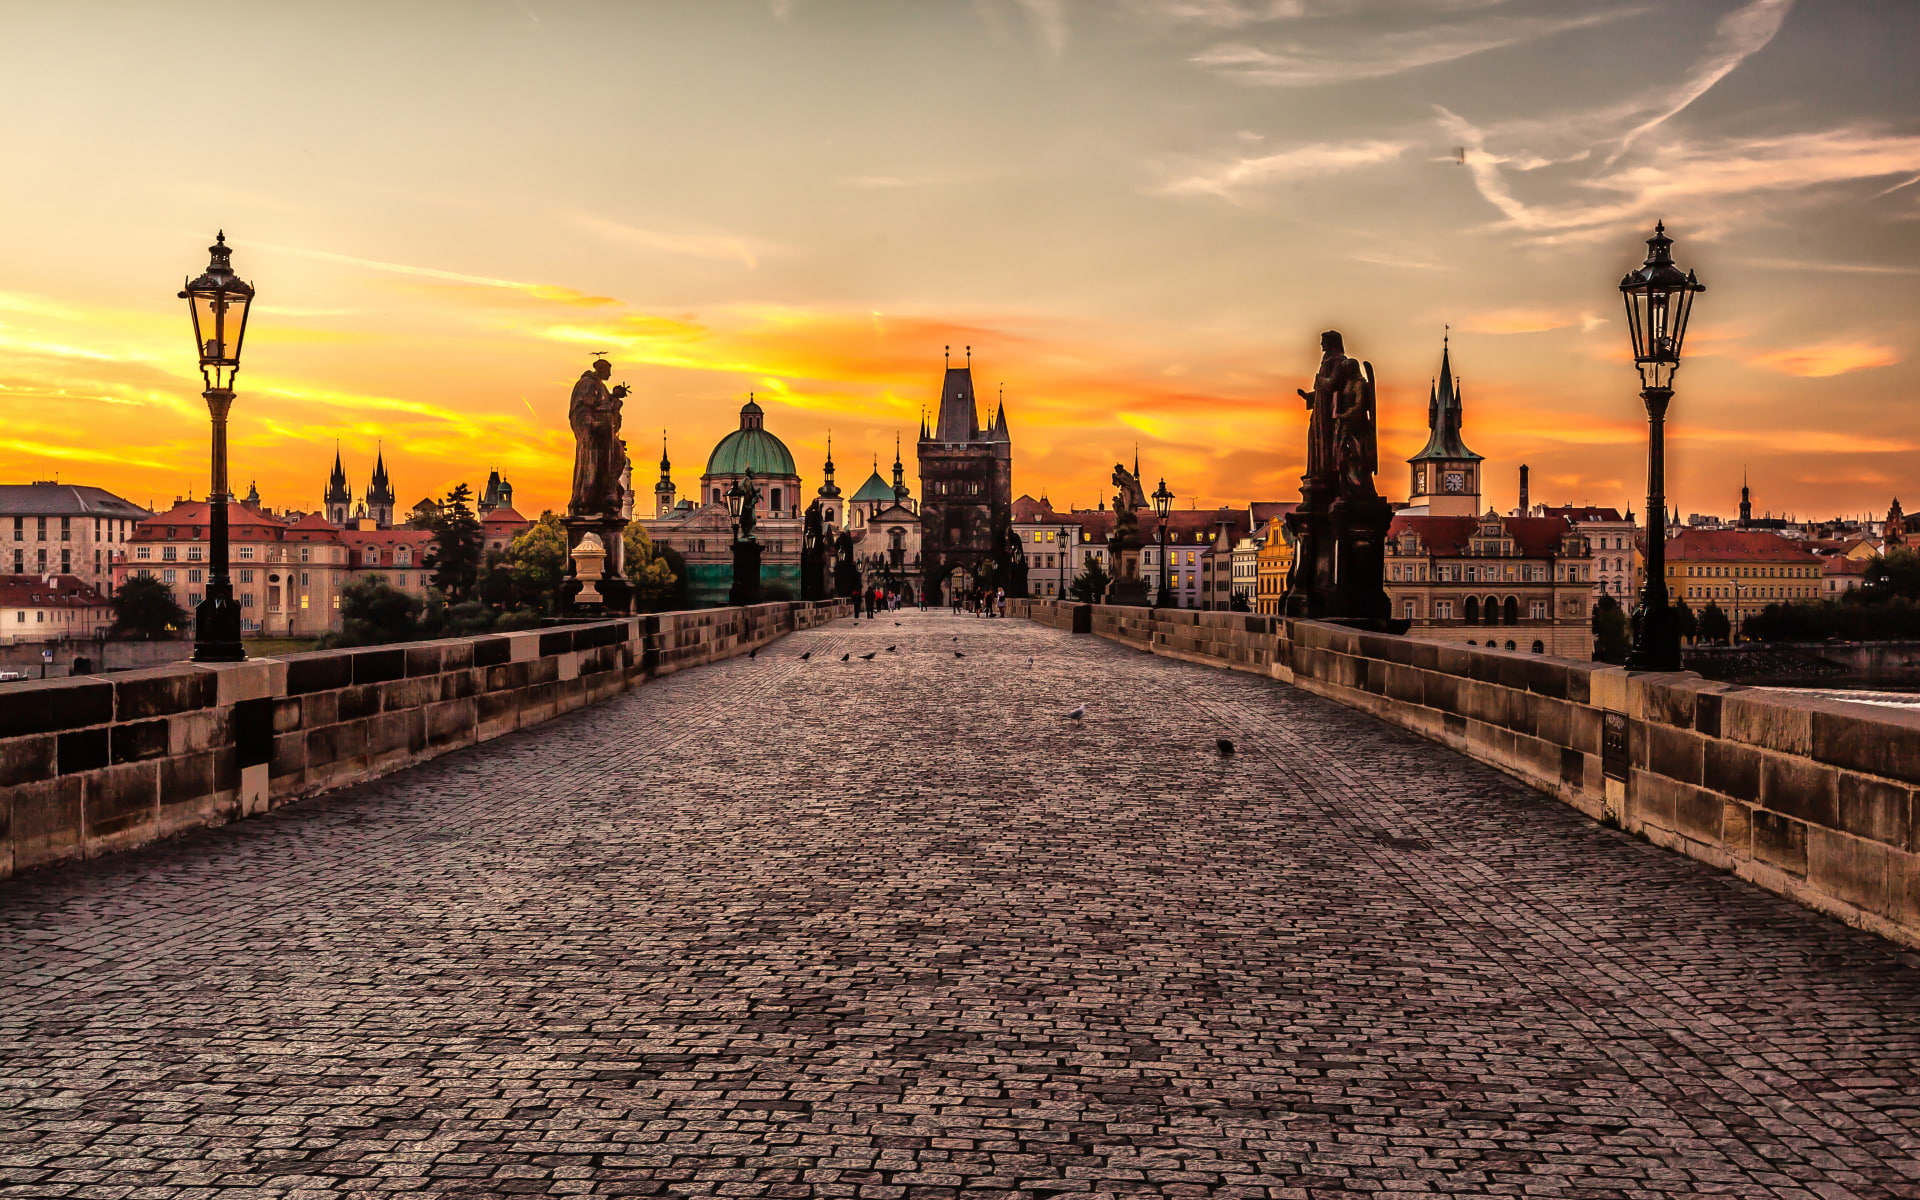 Charles Bridge, Czech Republic Is A Famous Historical Bridge That Crosses The River Vltava Its Construction Began In 1357 And Ended In The Early 15th Century Under The Auspices Of King Charles Iv